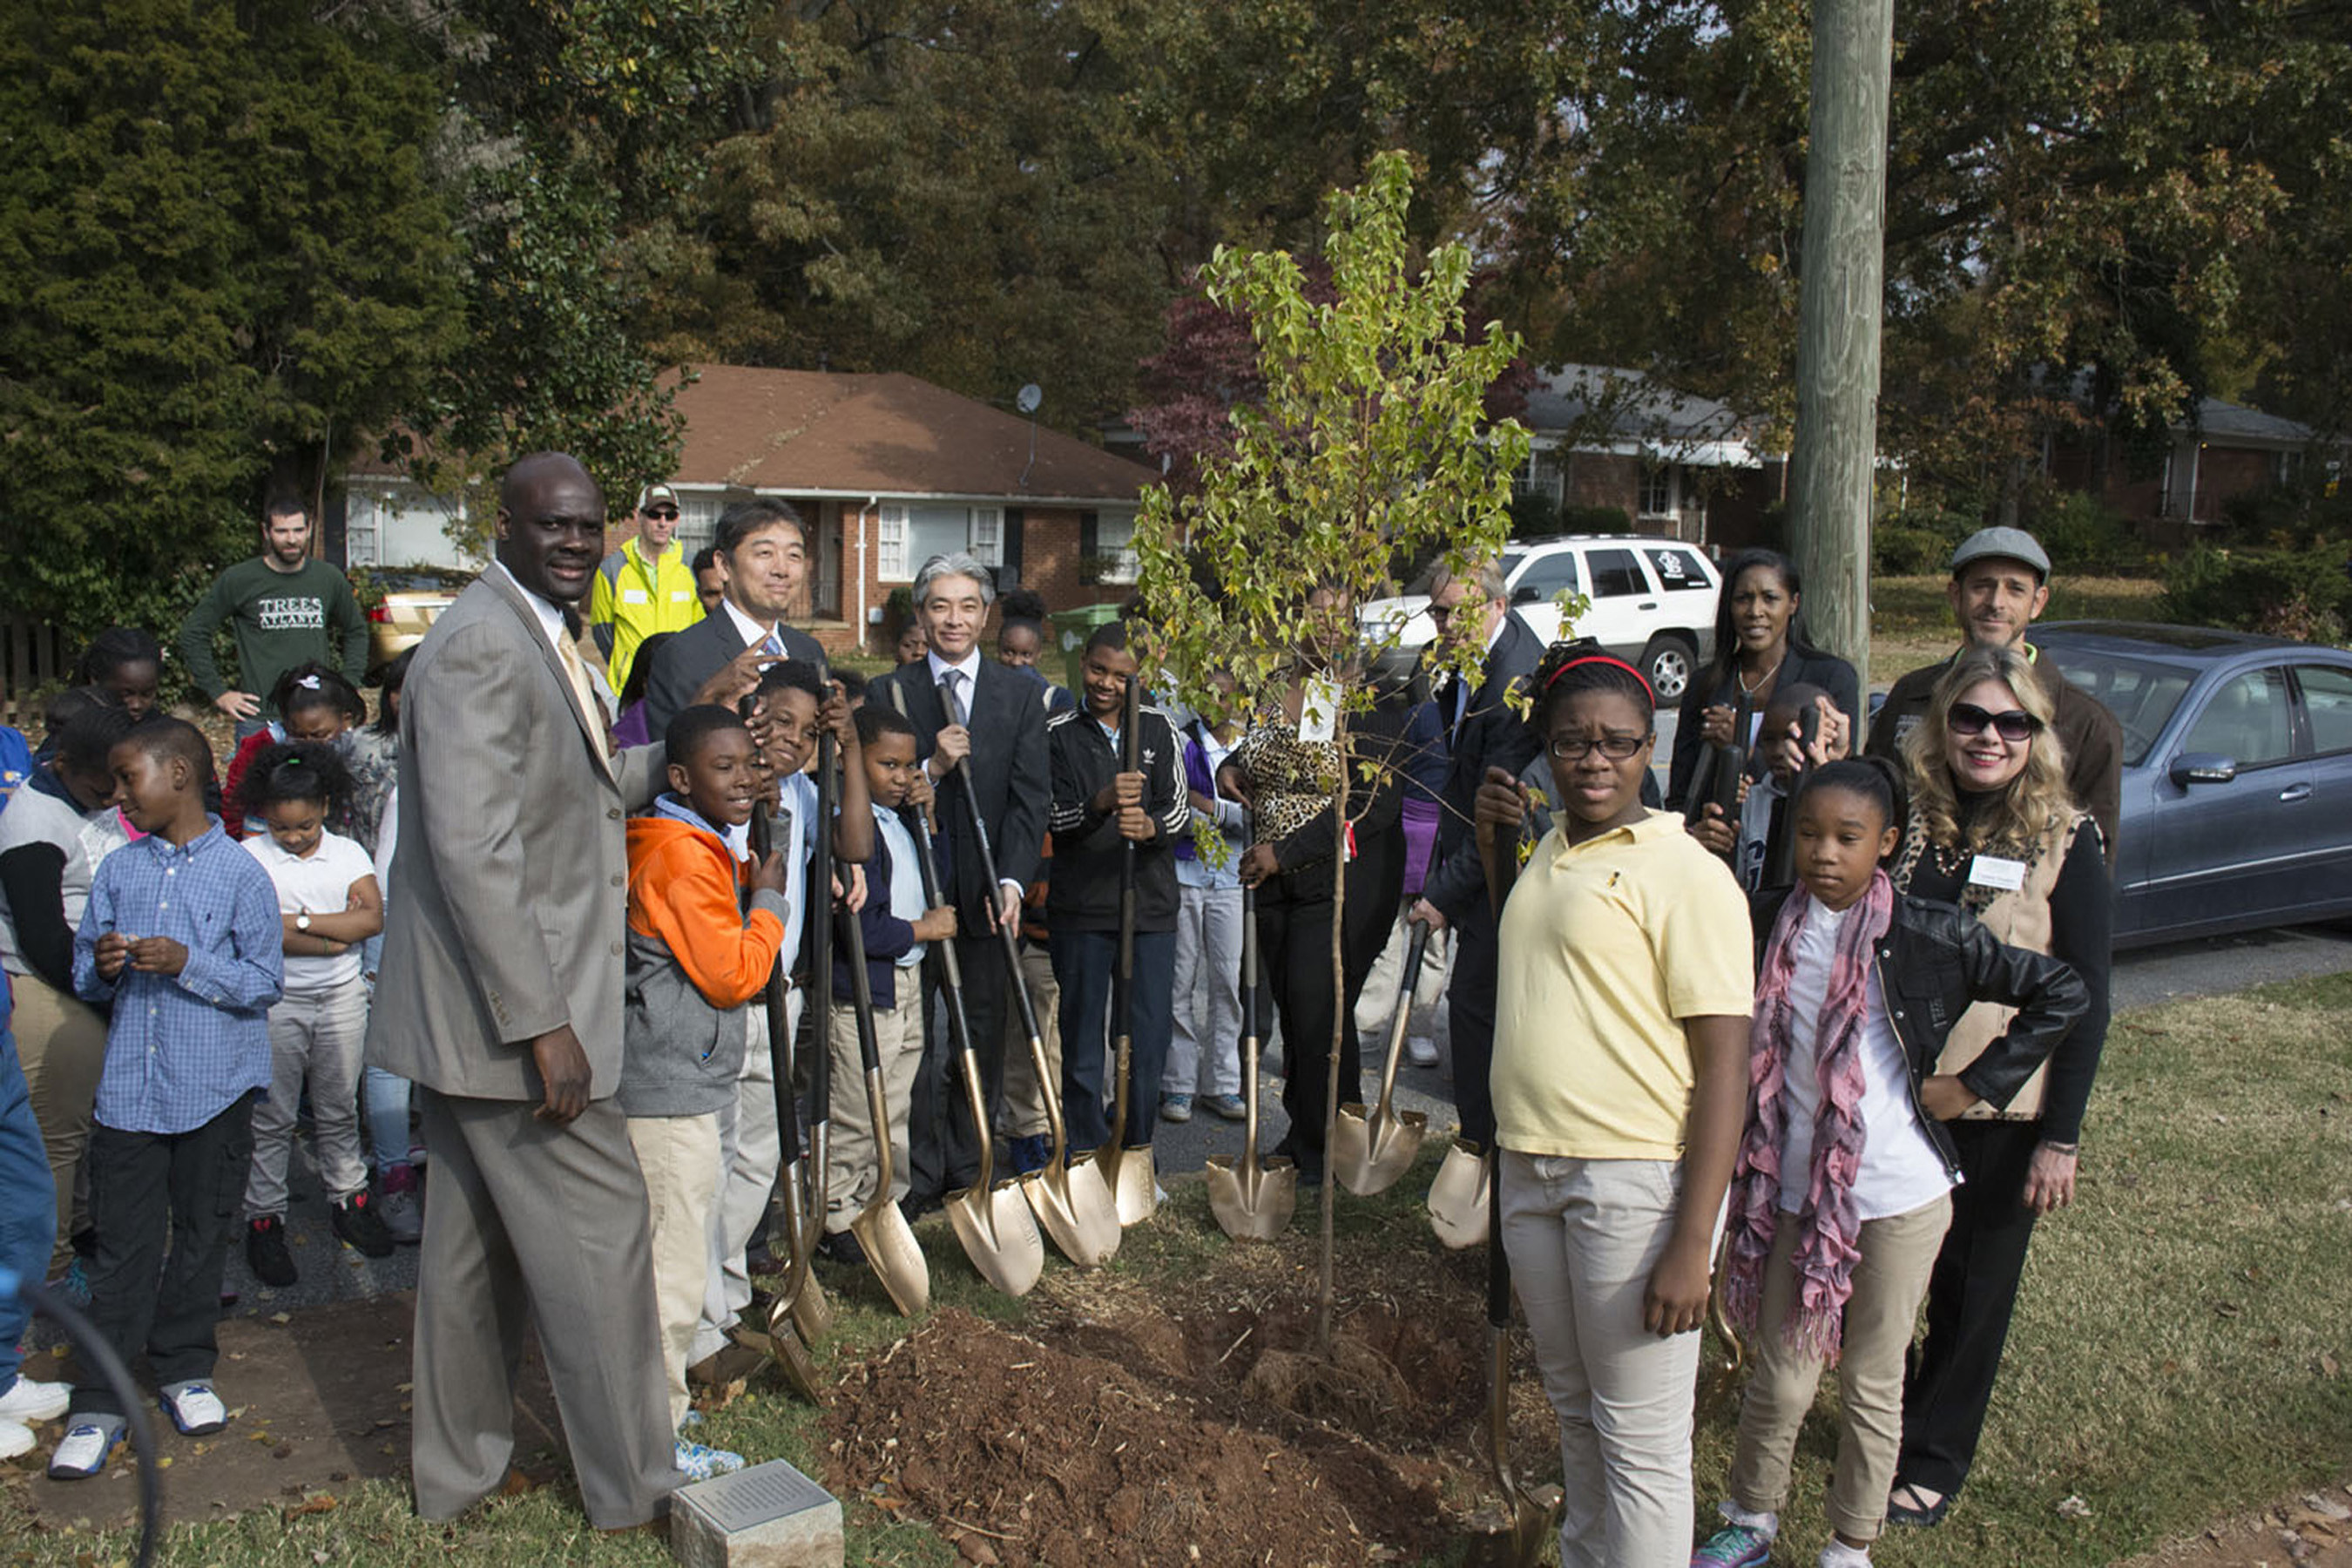 TOTO commences the company's 25th Anniversary Urban Greenways program with the planting of the first tree at Perkerson Elementary School. TOTO chose to plant trees to celebrate its 25th anniversary as they symbolize the company's commitment not only to the environment but also to improving people's lives.